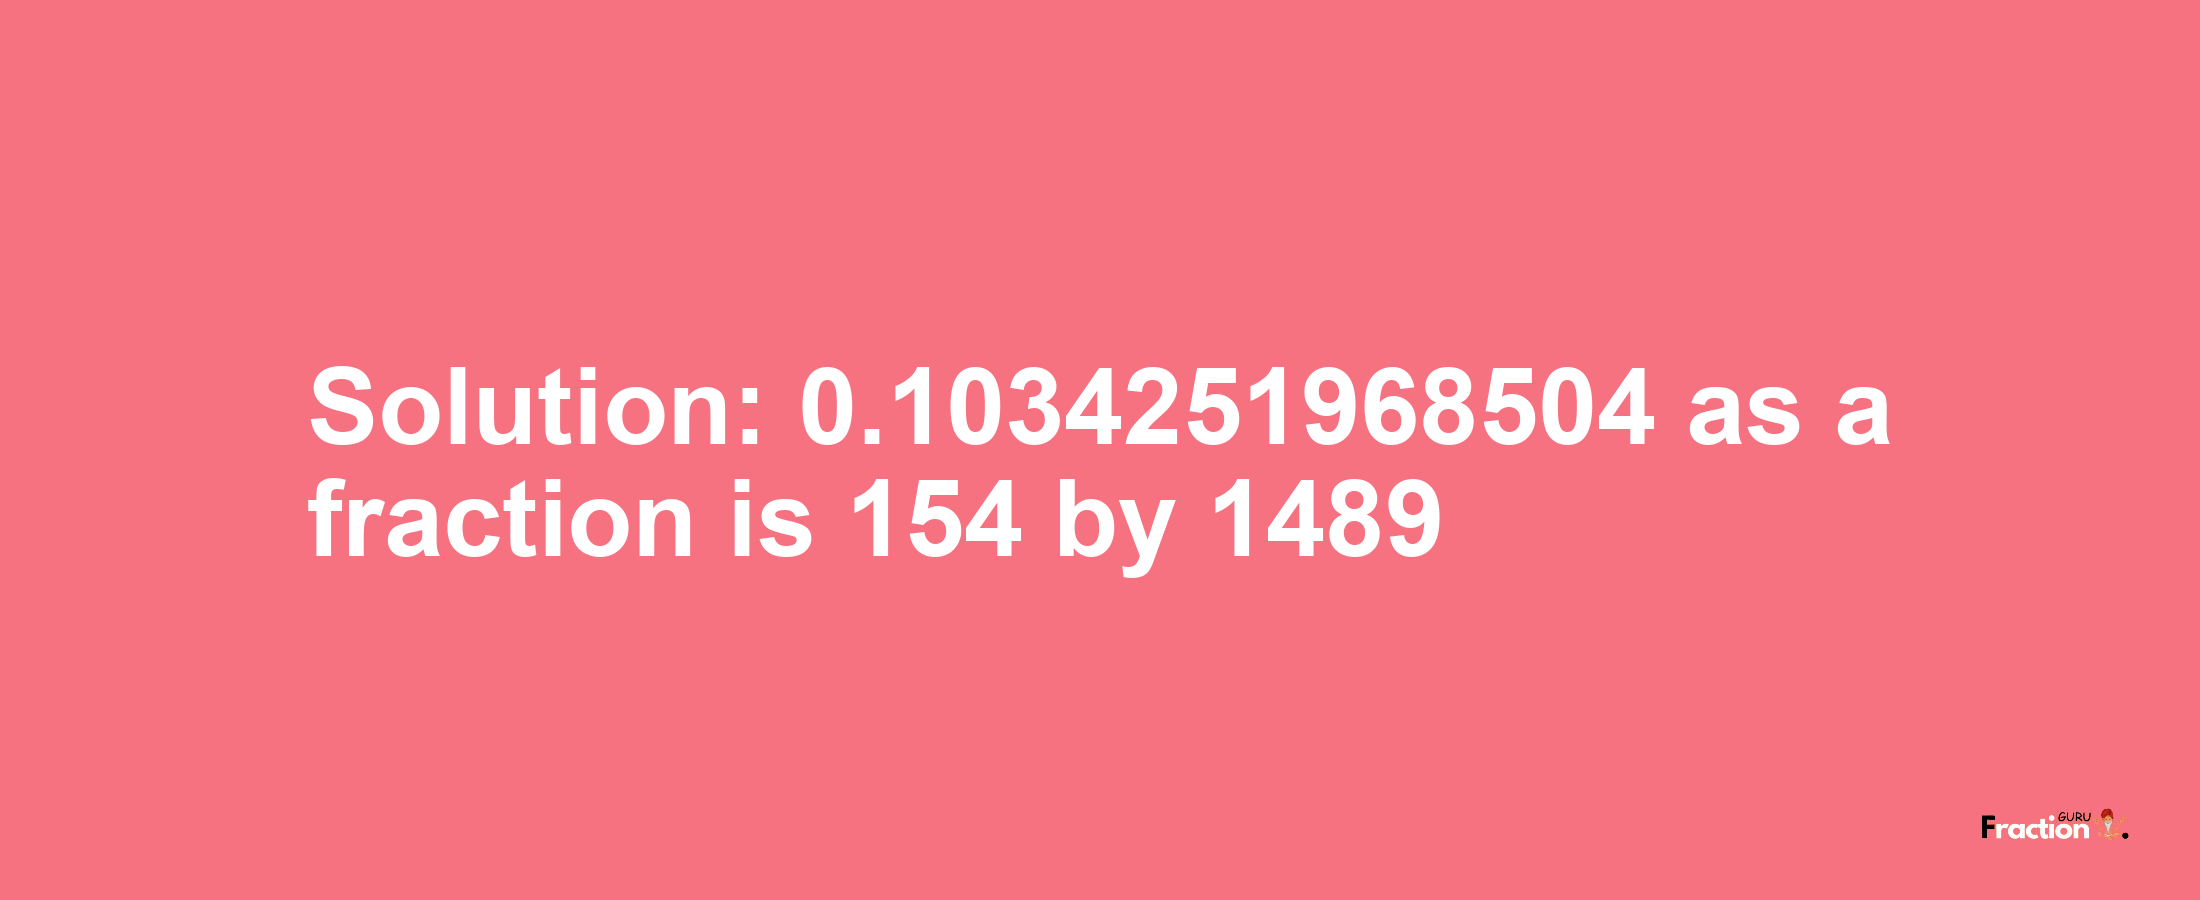 Solution:0.1034251968504 as a fraction is 154/1489